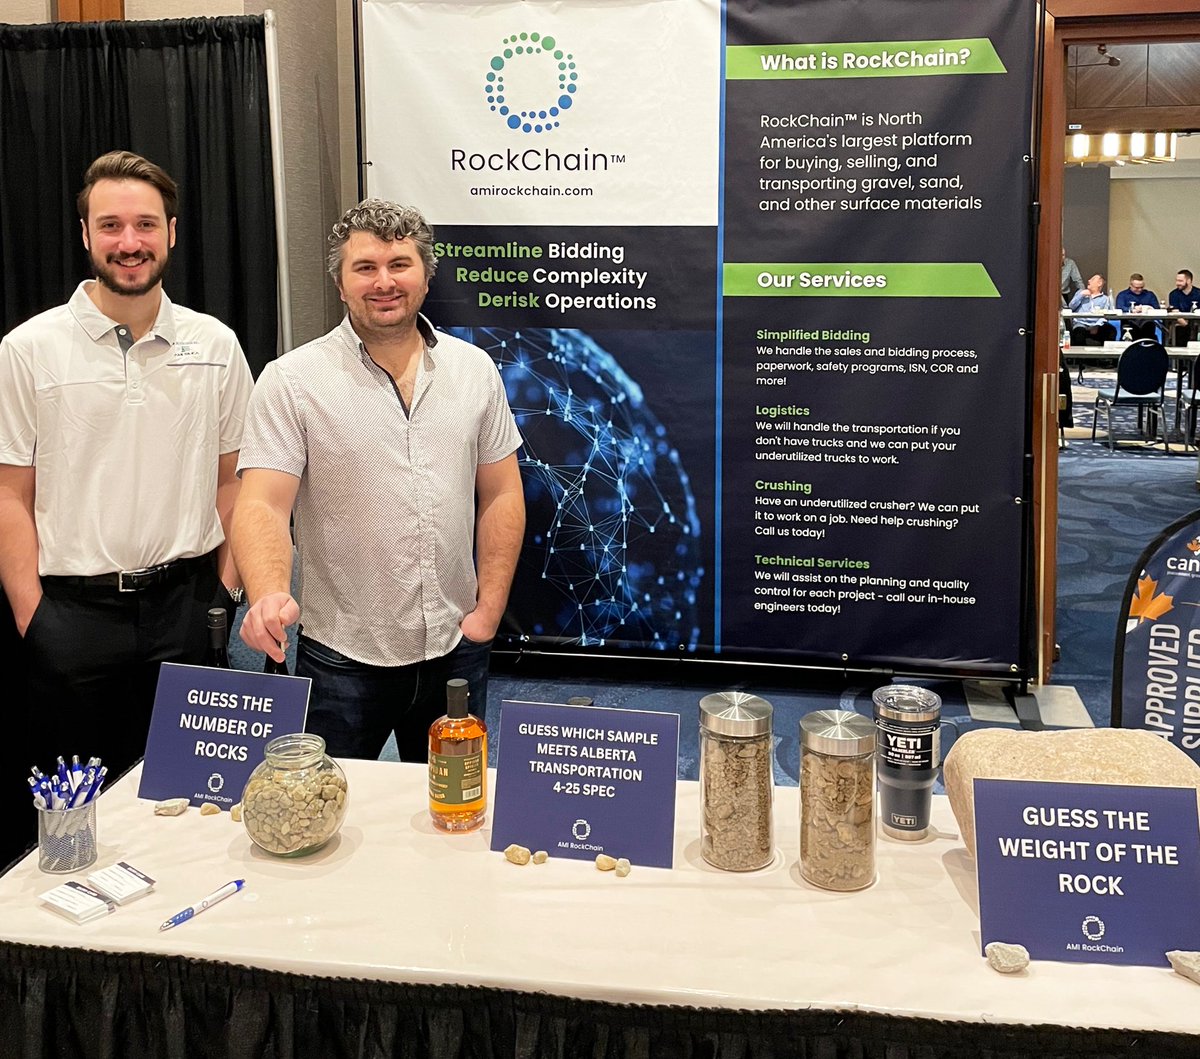 We're currently at the 2023 ASGA Convention! Do you have some rock solid knowledge? Come say hello and give us your best guess at our rock trivia!

#aggregates #supplychain #trucking #stone #sand #gravel #yyctech #yegtech #alberta #construction #concrete #cement #gravelsupplier